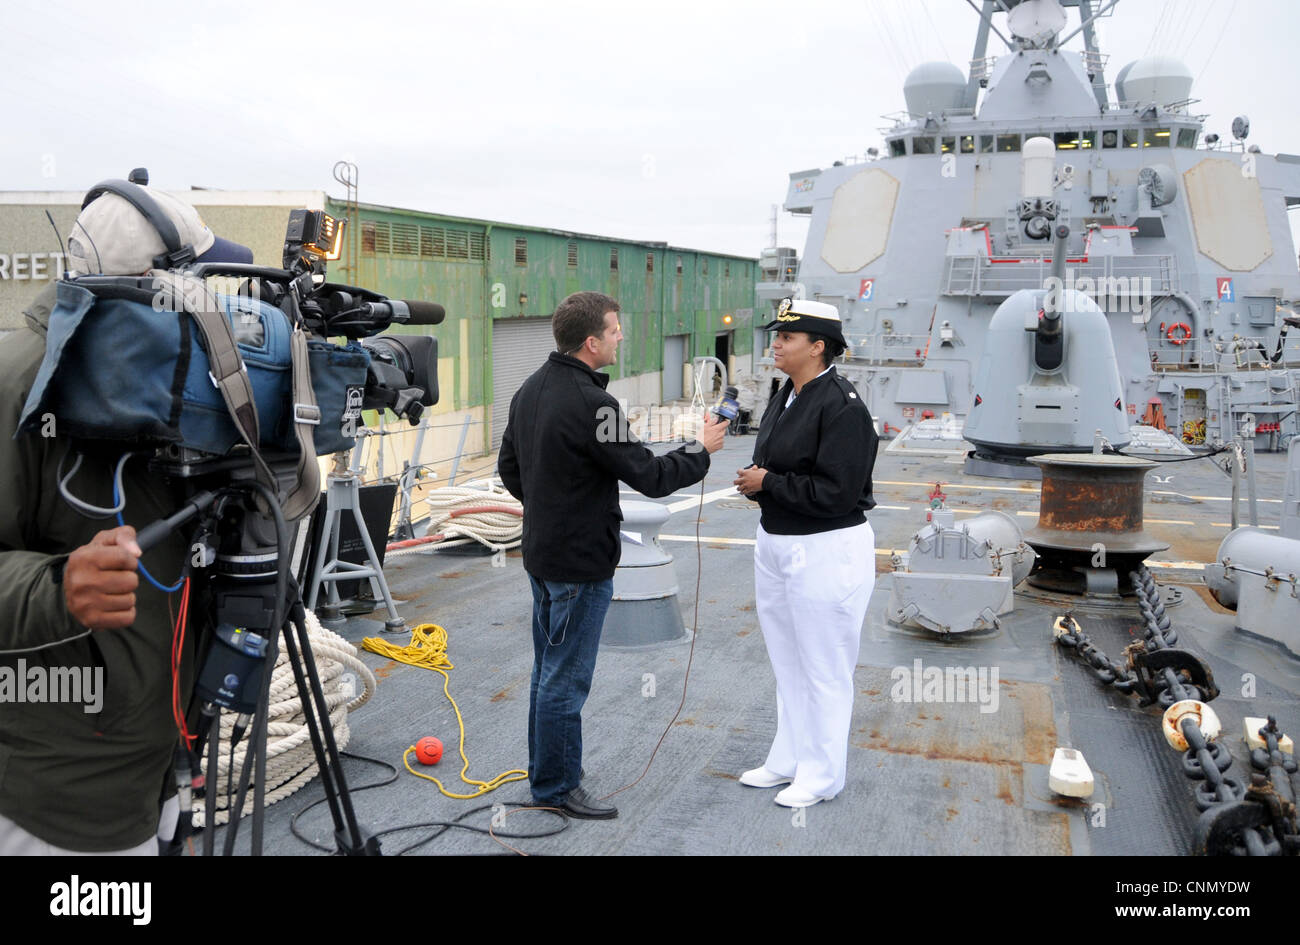 Cmdr. Monika Stoker, commanding officer of the guided-missile destroyer USS Mitscher (DDG 57) and the first African-American female to command an Aegis-class destroyer, speaks with Scott Satchfield of the New Orleans CBS affiliate, WWL Channel 4. The War of 1812 Bicentennial Commemoration in New Orleans is part of a series of city visits by the Navy, Coast Guard, Marine Corps and Operation Sail beginning in April 2012 and concluding in 2015. New Orleans is the first and the last city visit in the series. Stock Photo